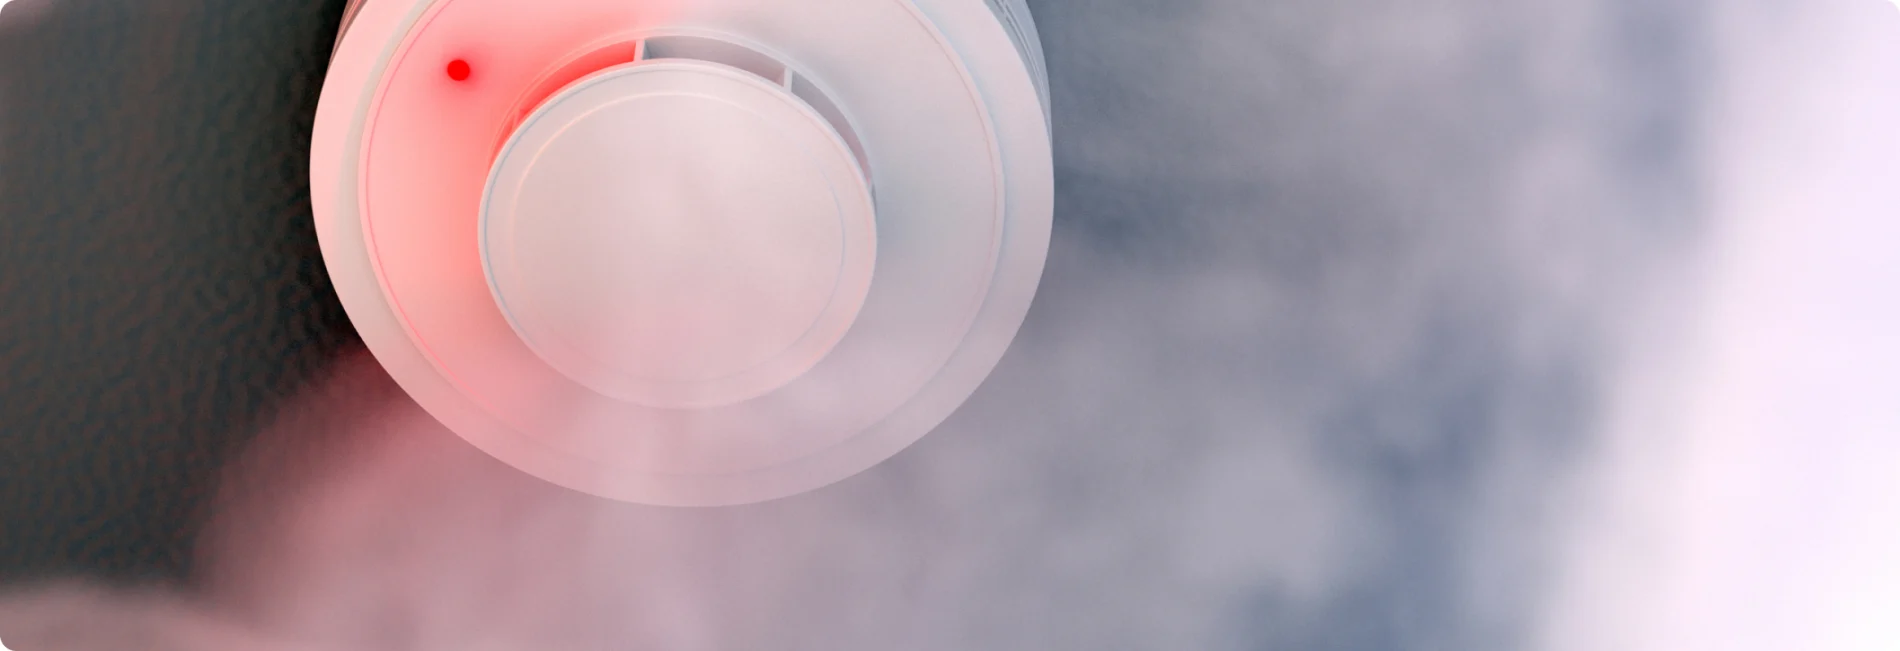 A smoke detector is shown within a cloud of smoke.